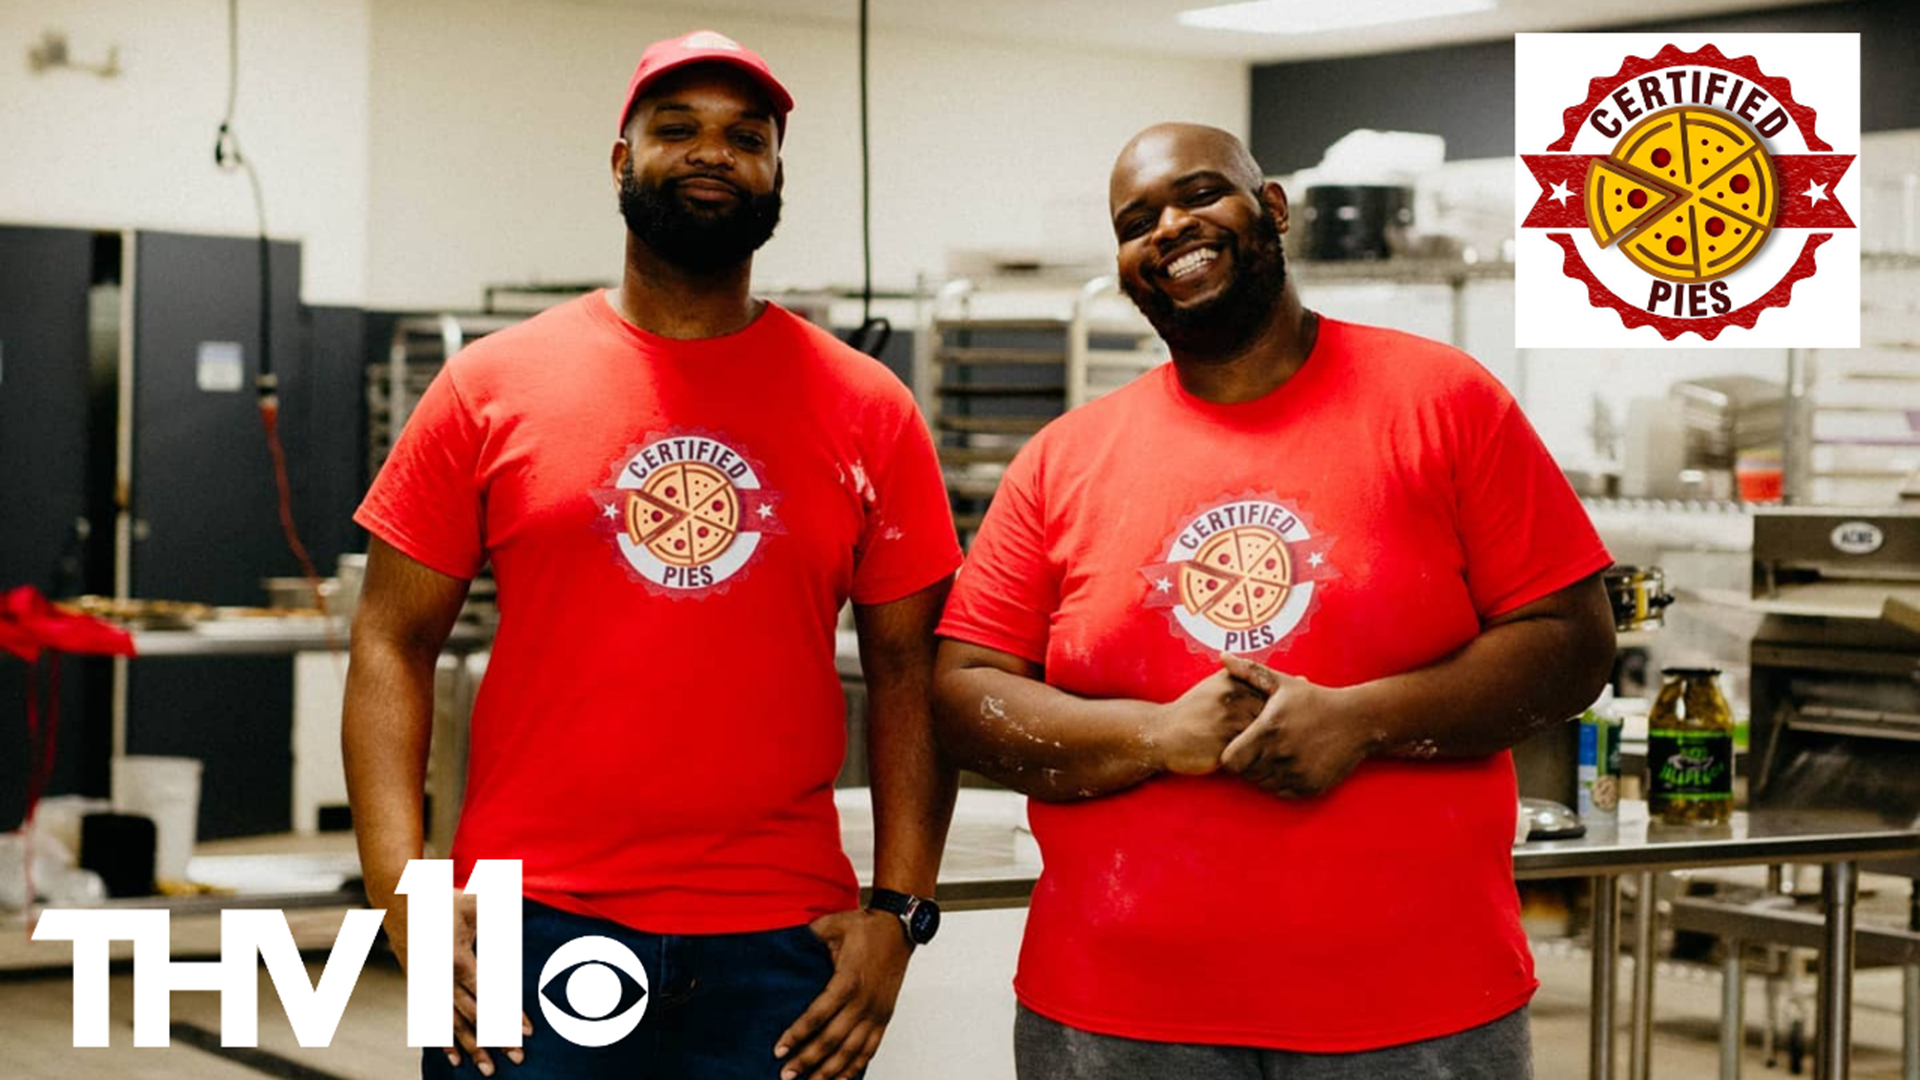 Kreg Stewart and Harlem Wilson share what Certified Pies is all about.